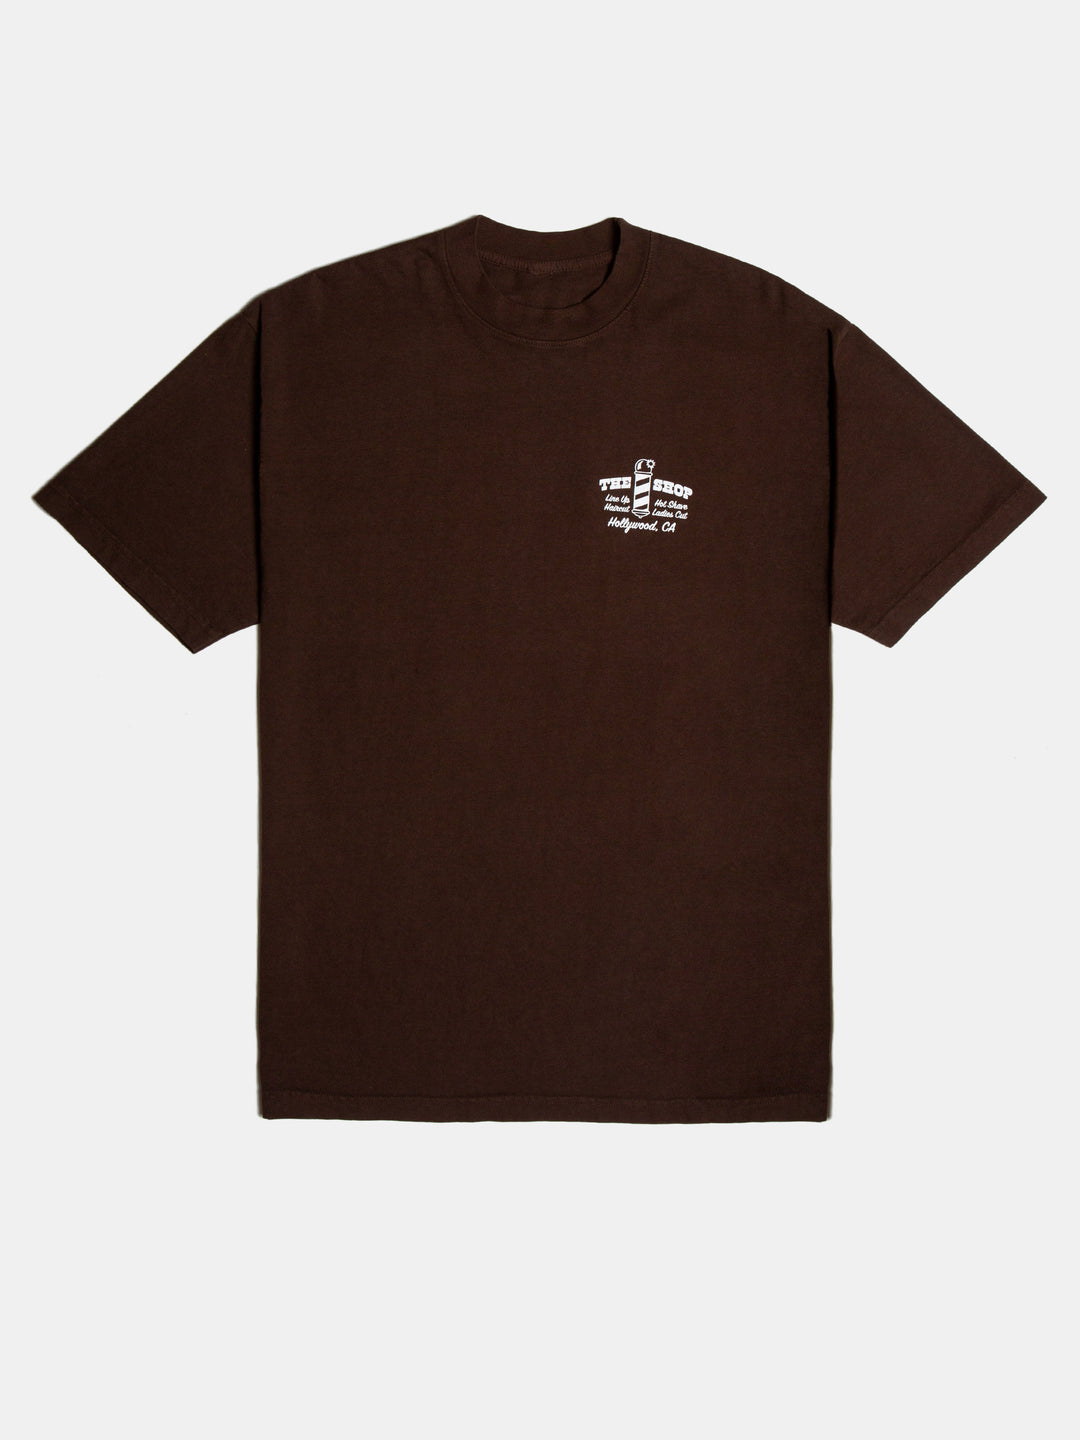 The Shop: S5E6 Menu Tee Brownie - front of tee